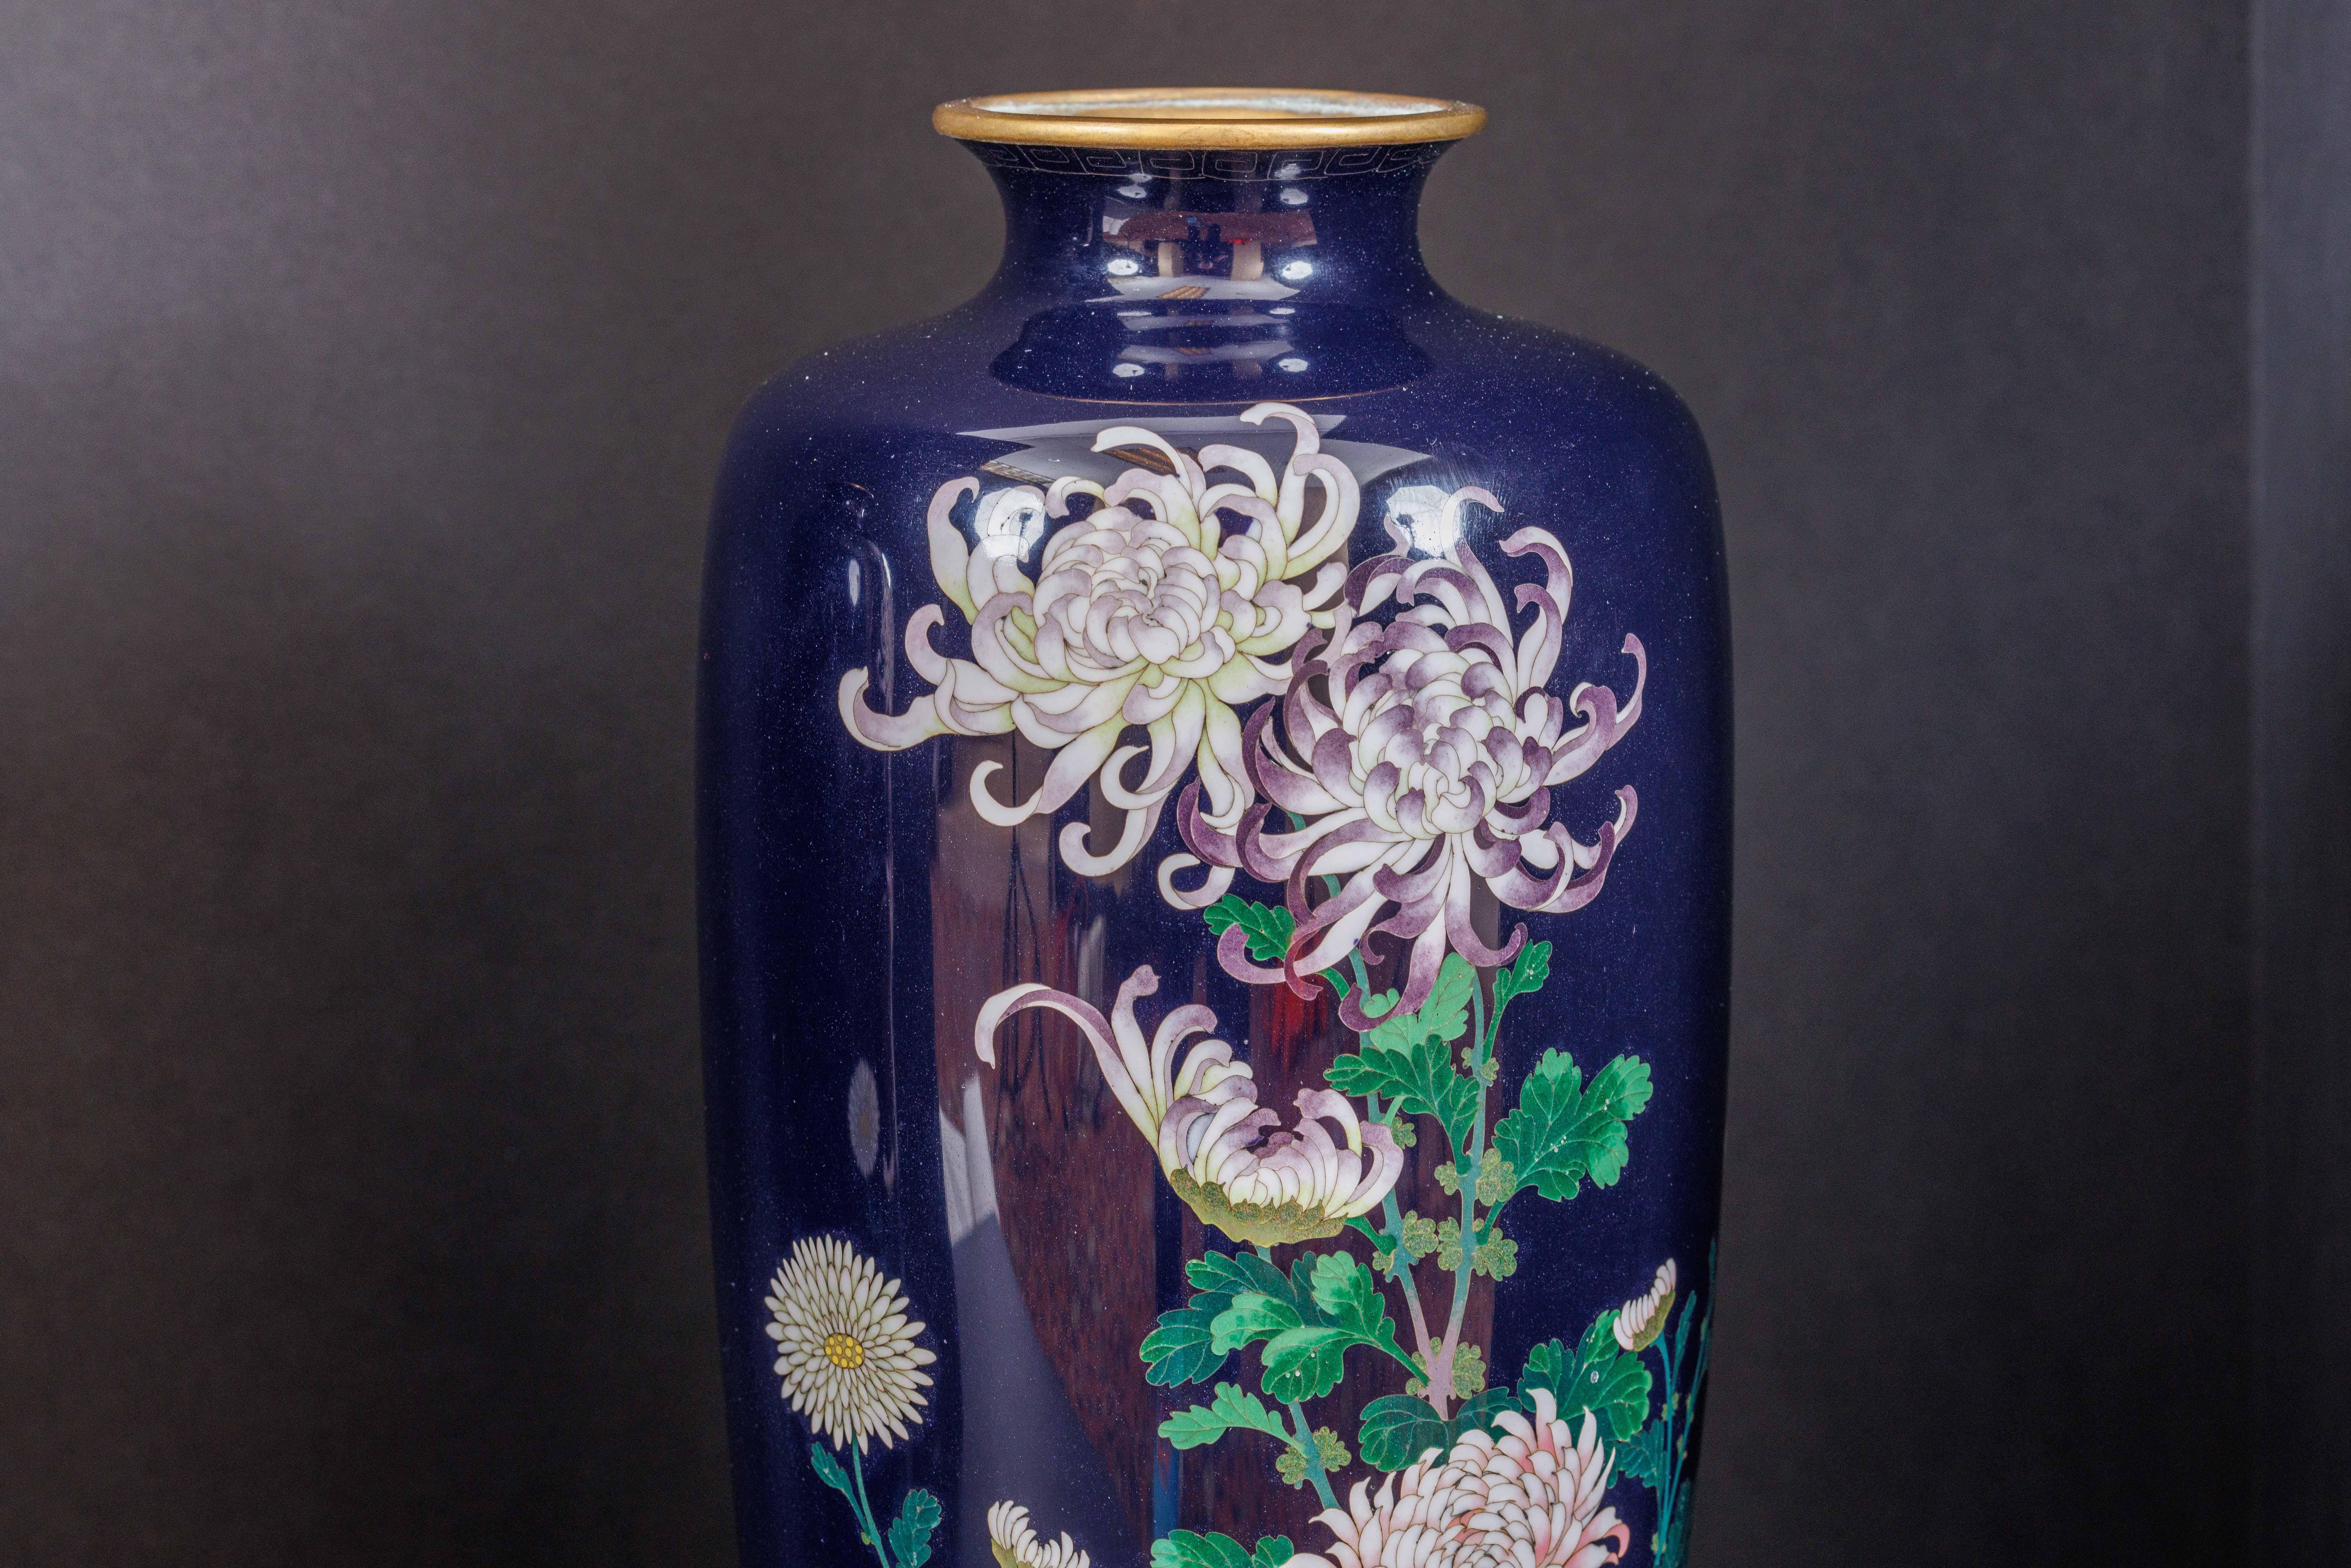 An Exquisite Pair Of Japanese Cloisonné Enamel Vases with Chrysanthemum Blossoms For Sale 5